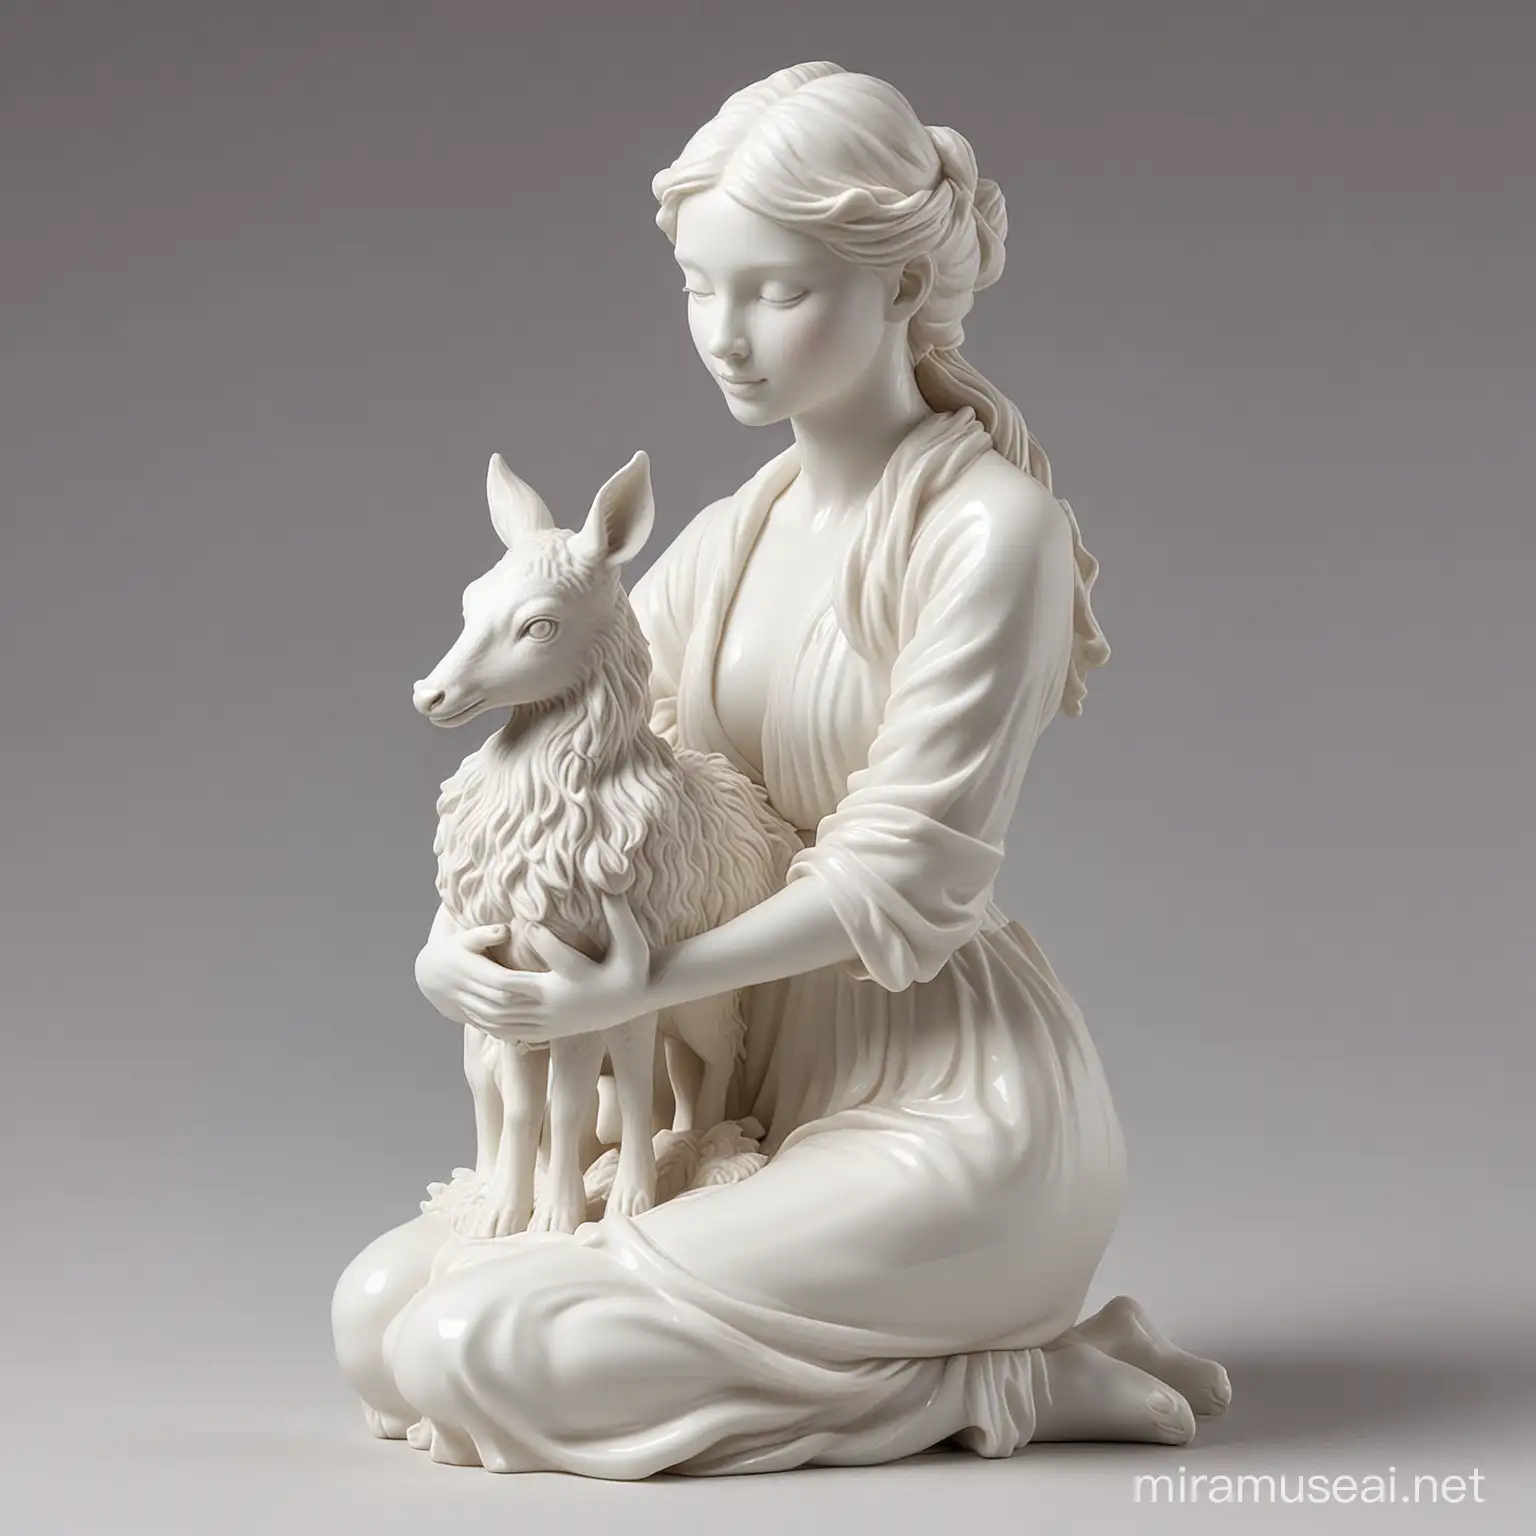 Sculpture of Person Embracing Fawn in White Porcelain